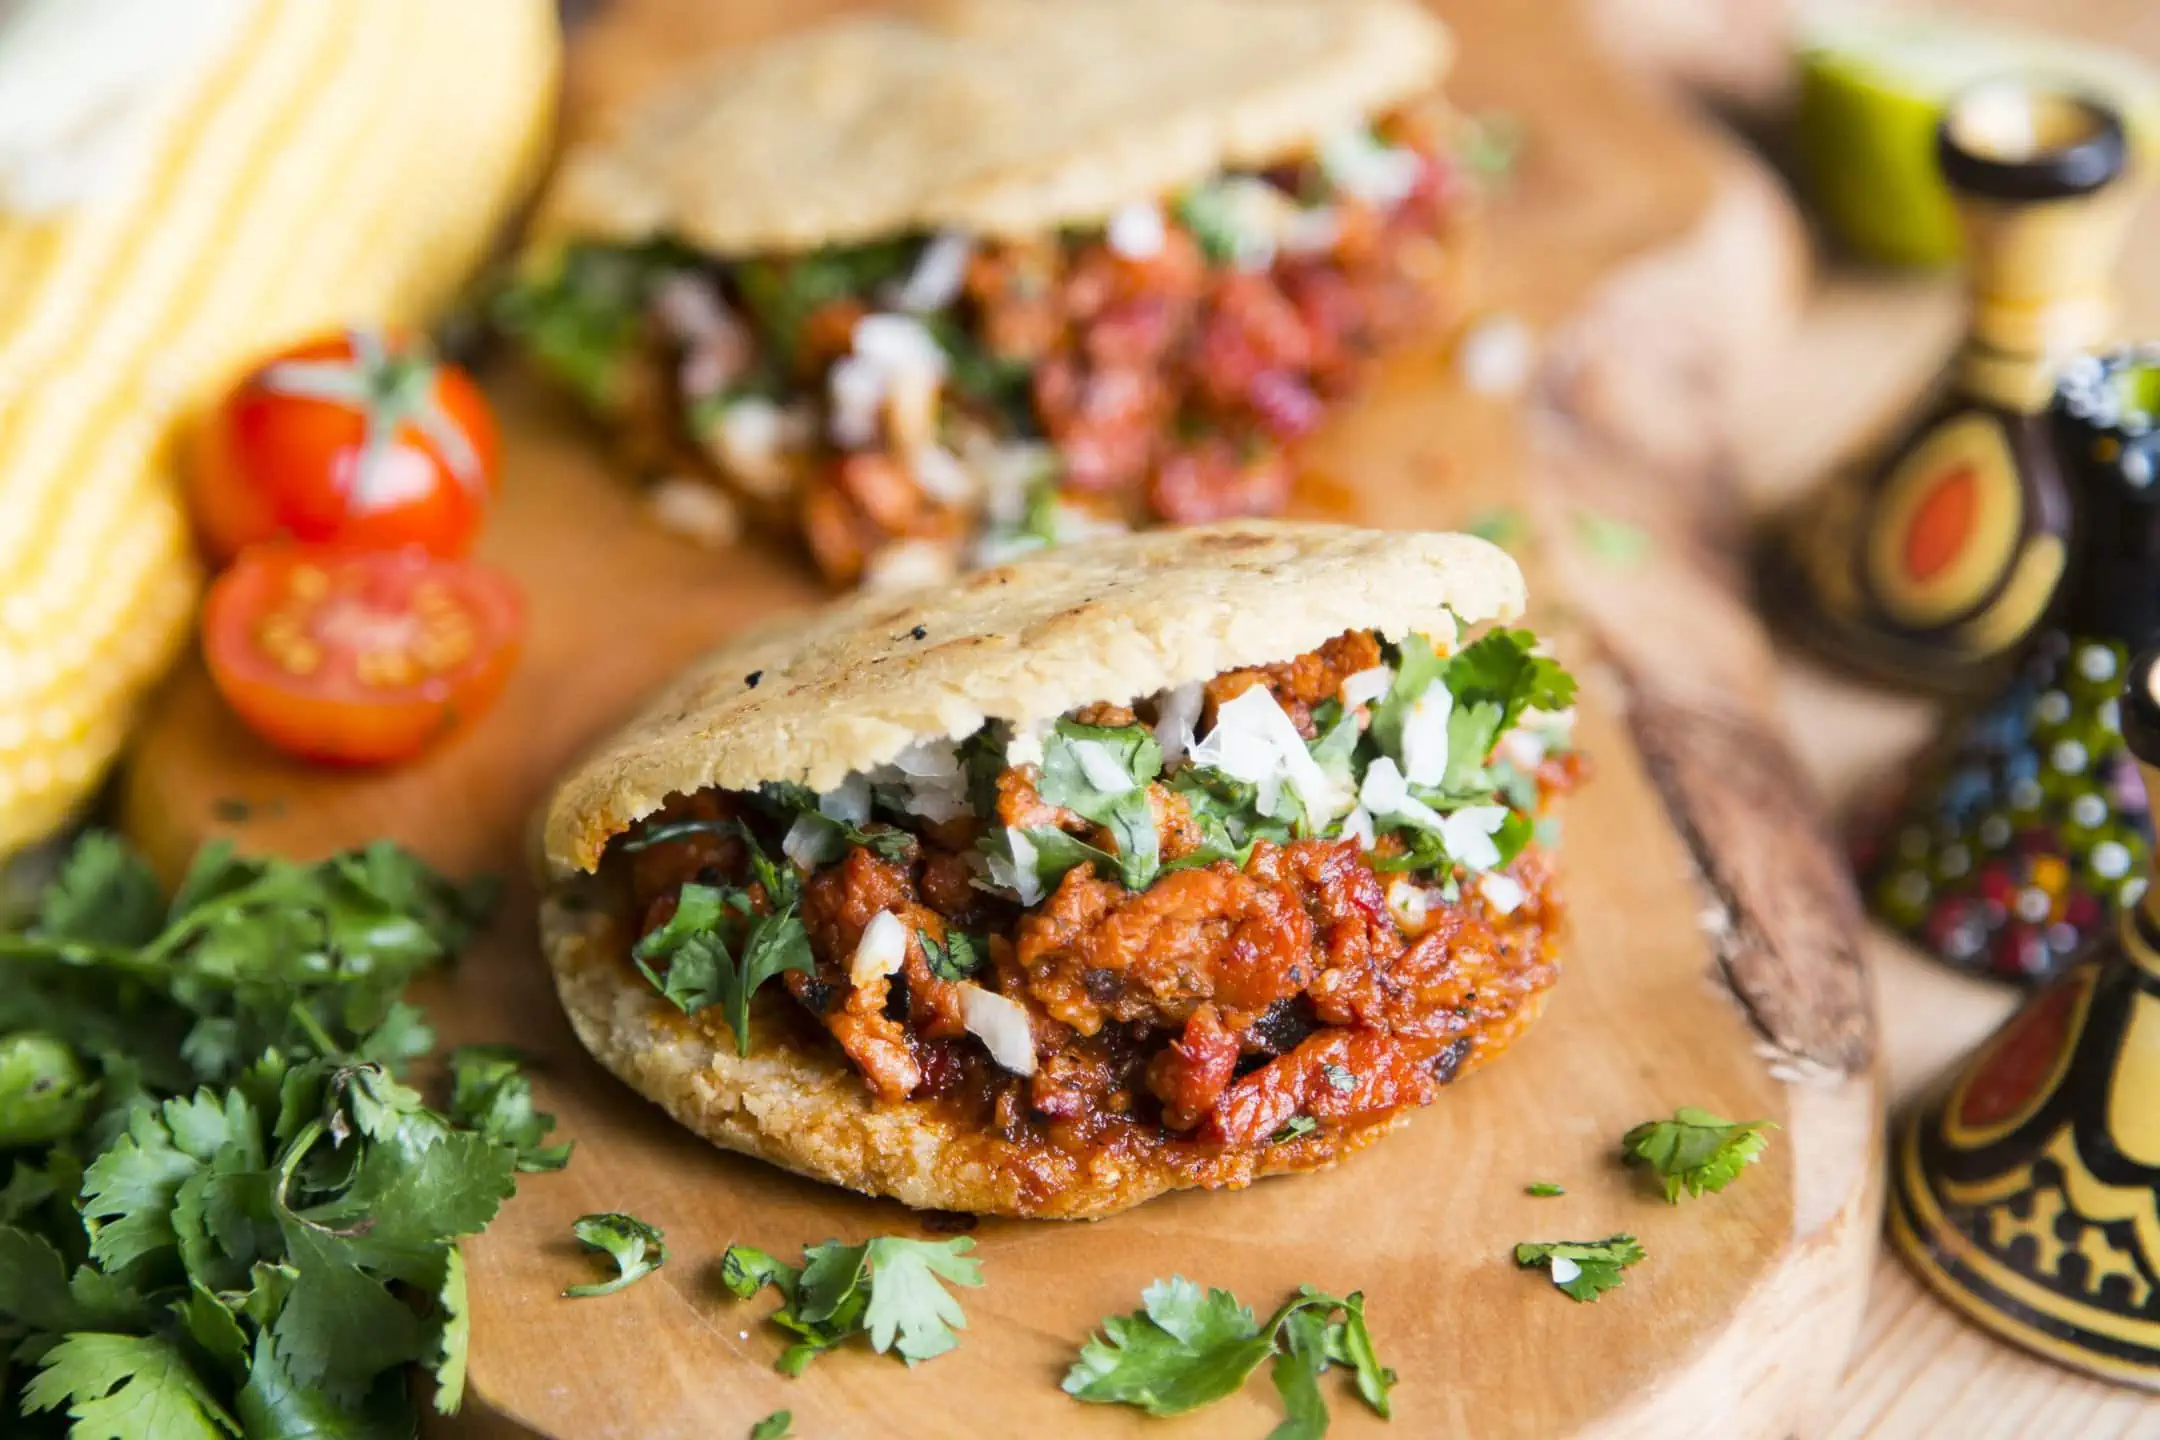 Gorditas with Maseca recipe stuffed with greens and chili